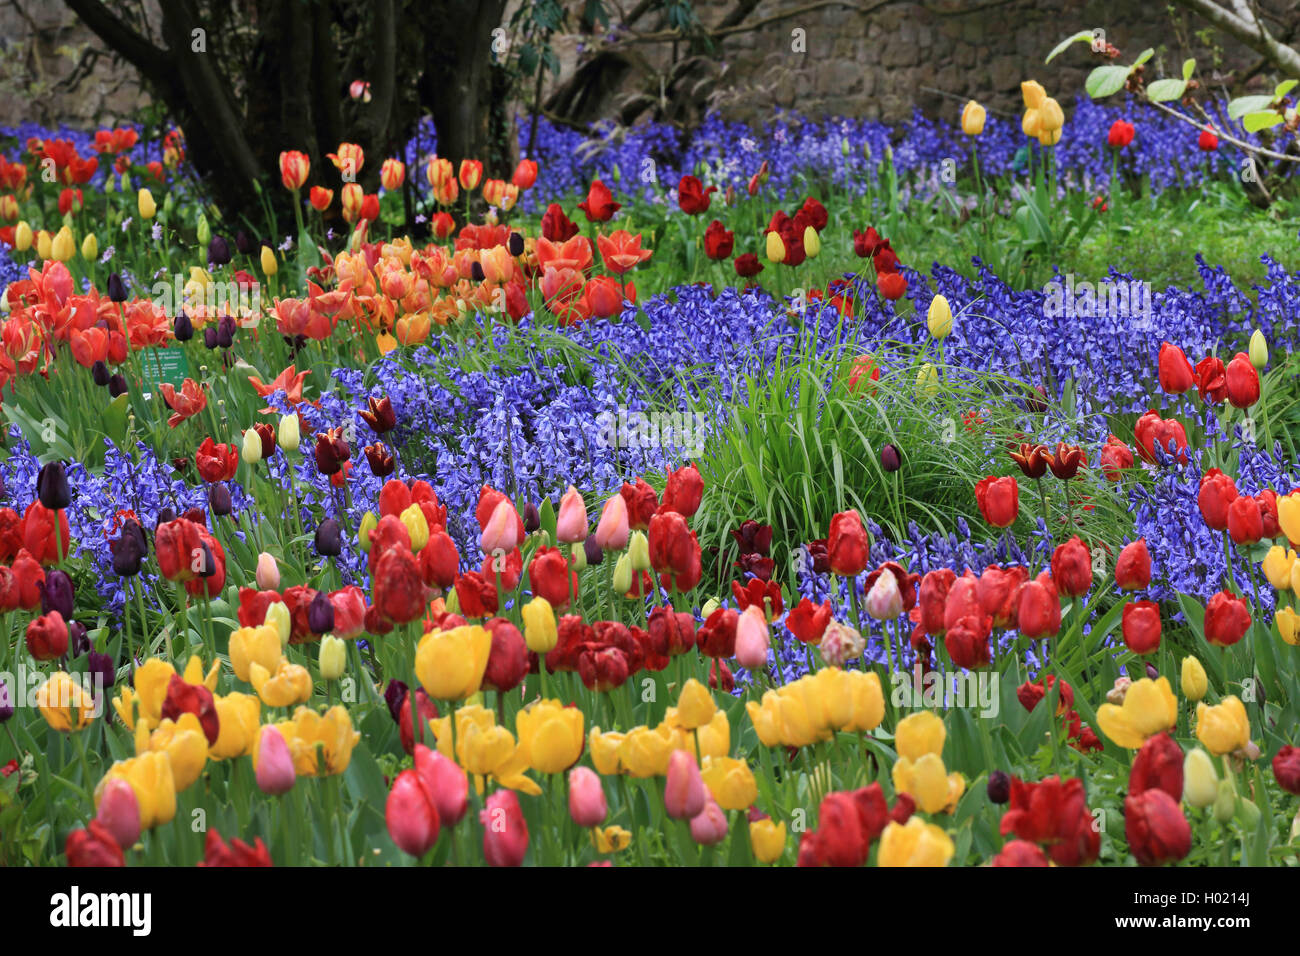 common garden tulip (Tulipa gesneriana), flower bed with lots of blooming tulips and hyacinthes, Germany Stock Photo